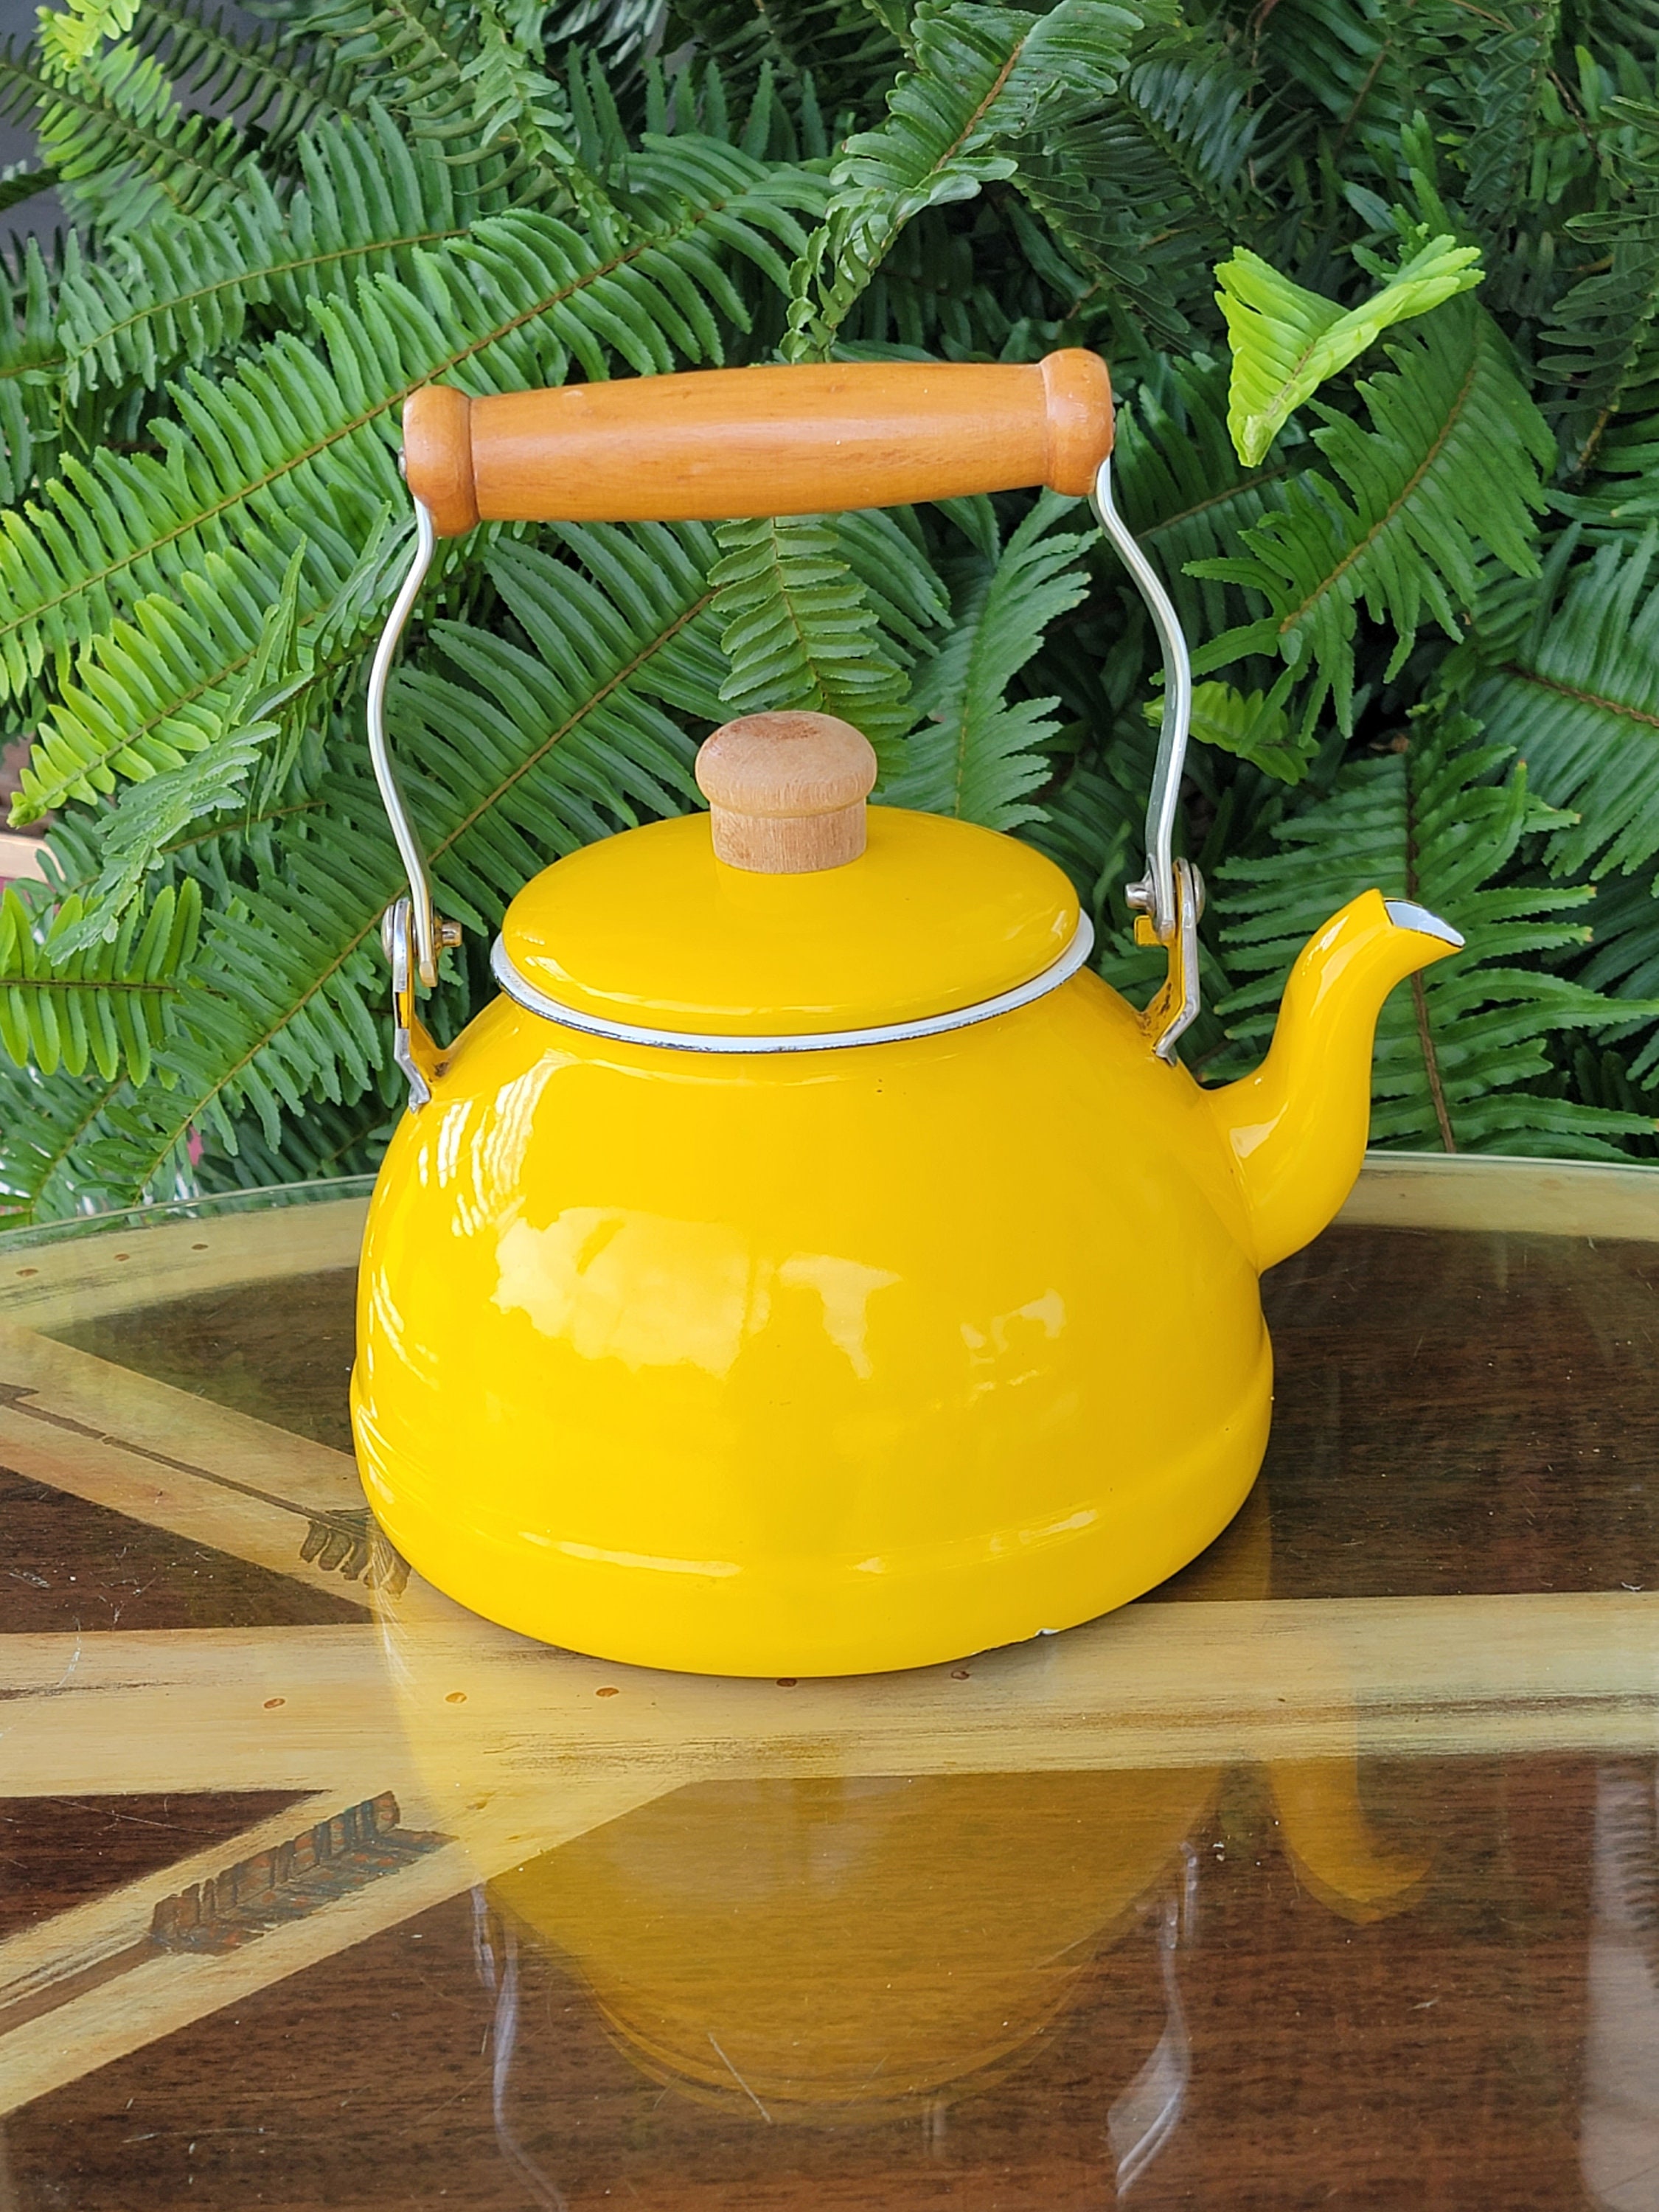 Valiant 4 Cup Mid Century Yellow Electric Hot Pot 